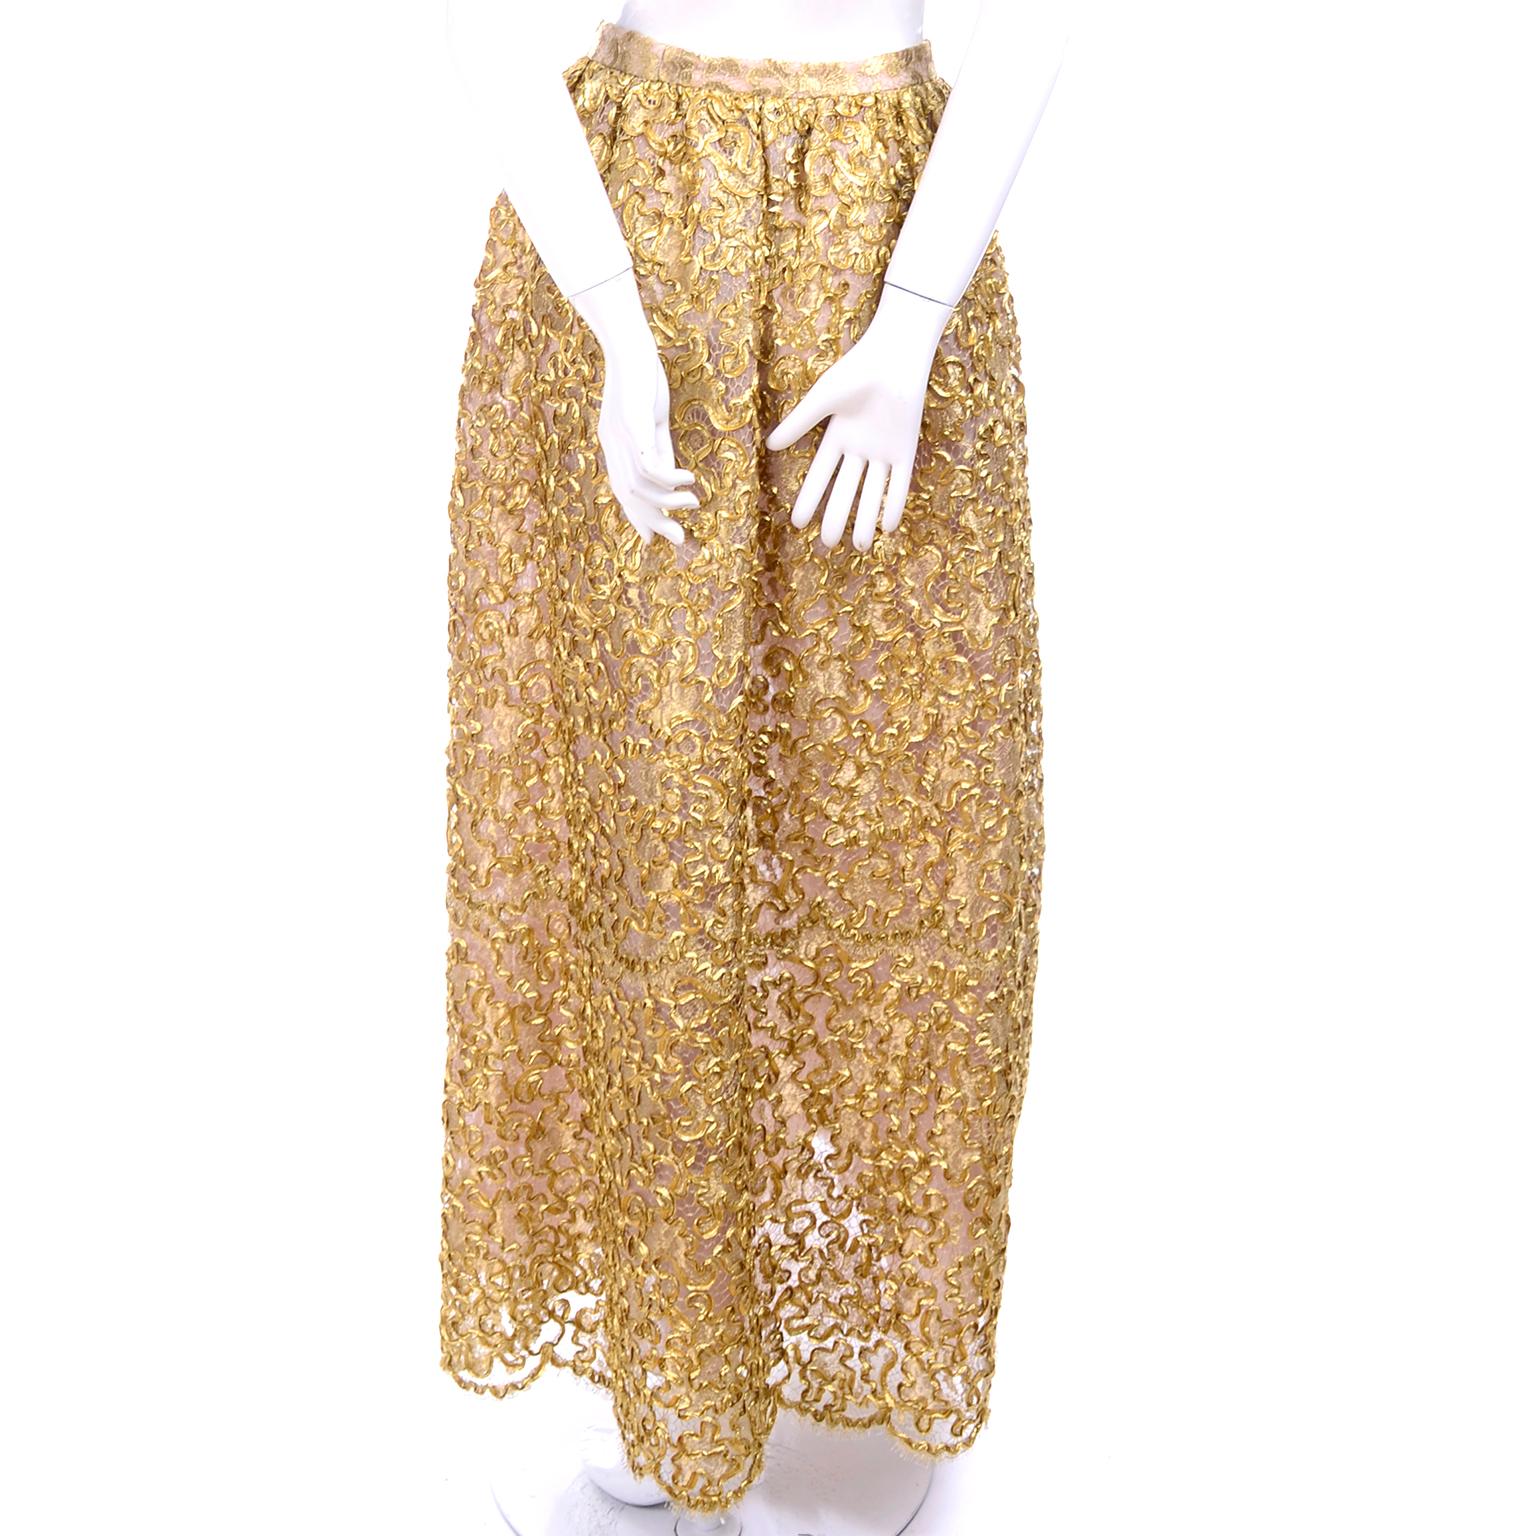 Brown Mary McFadden Couture Evening Skirt in Gold Metallic Lace & Soutache New w/ Tags